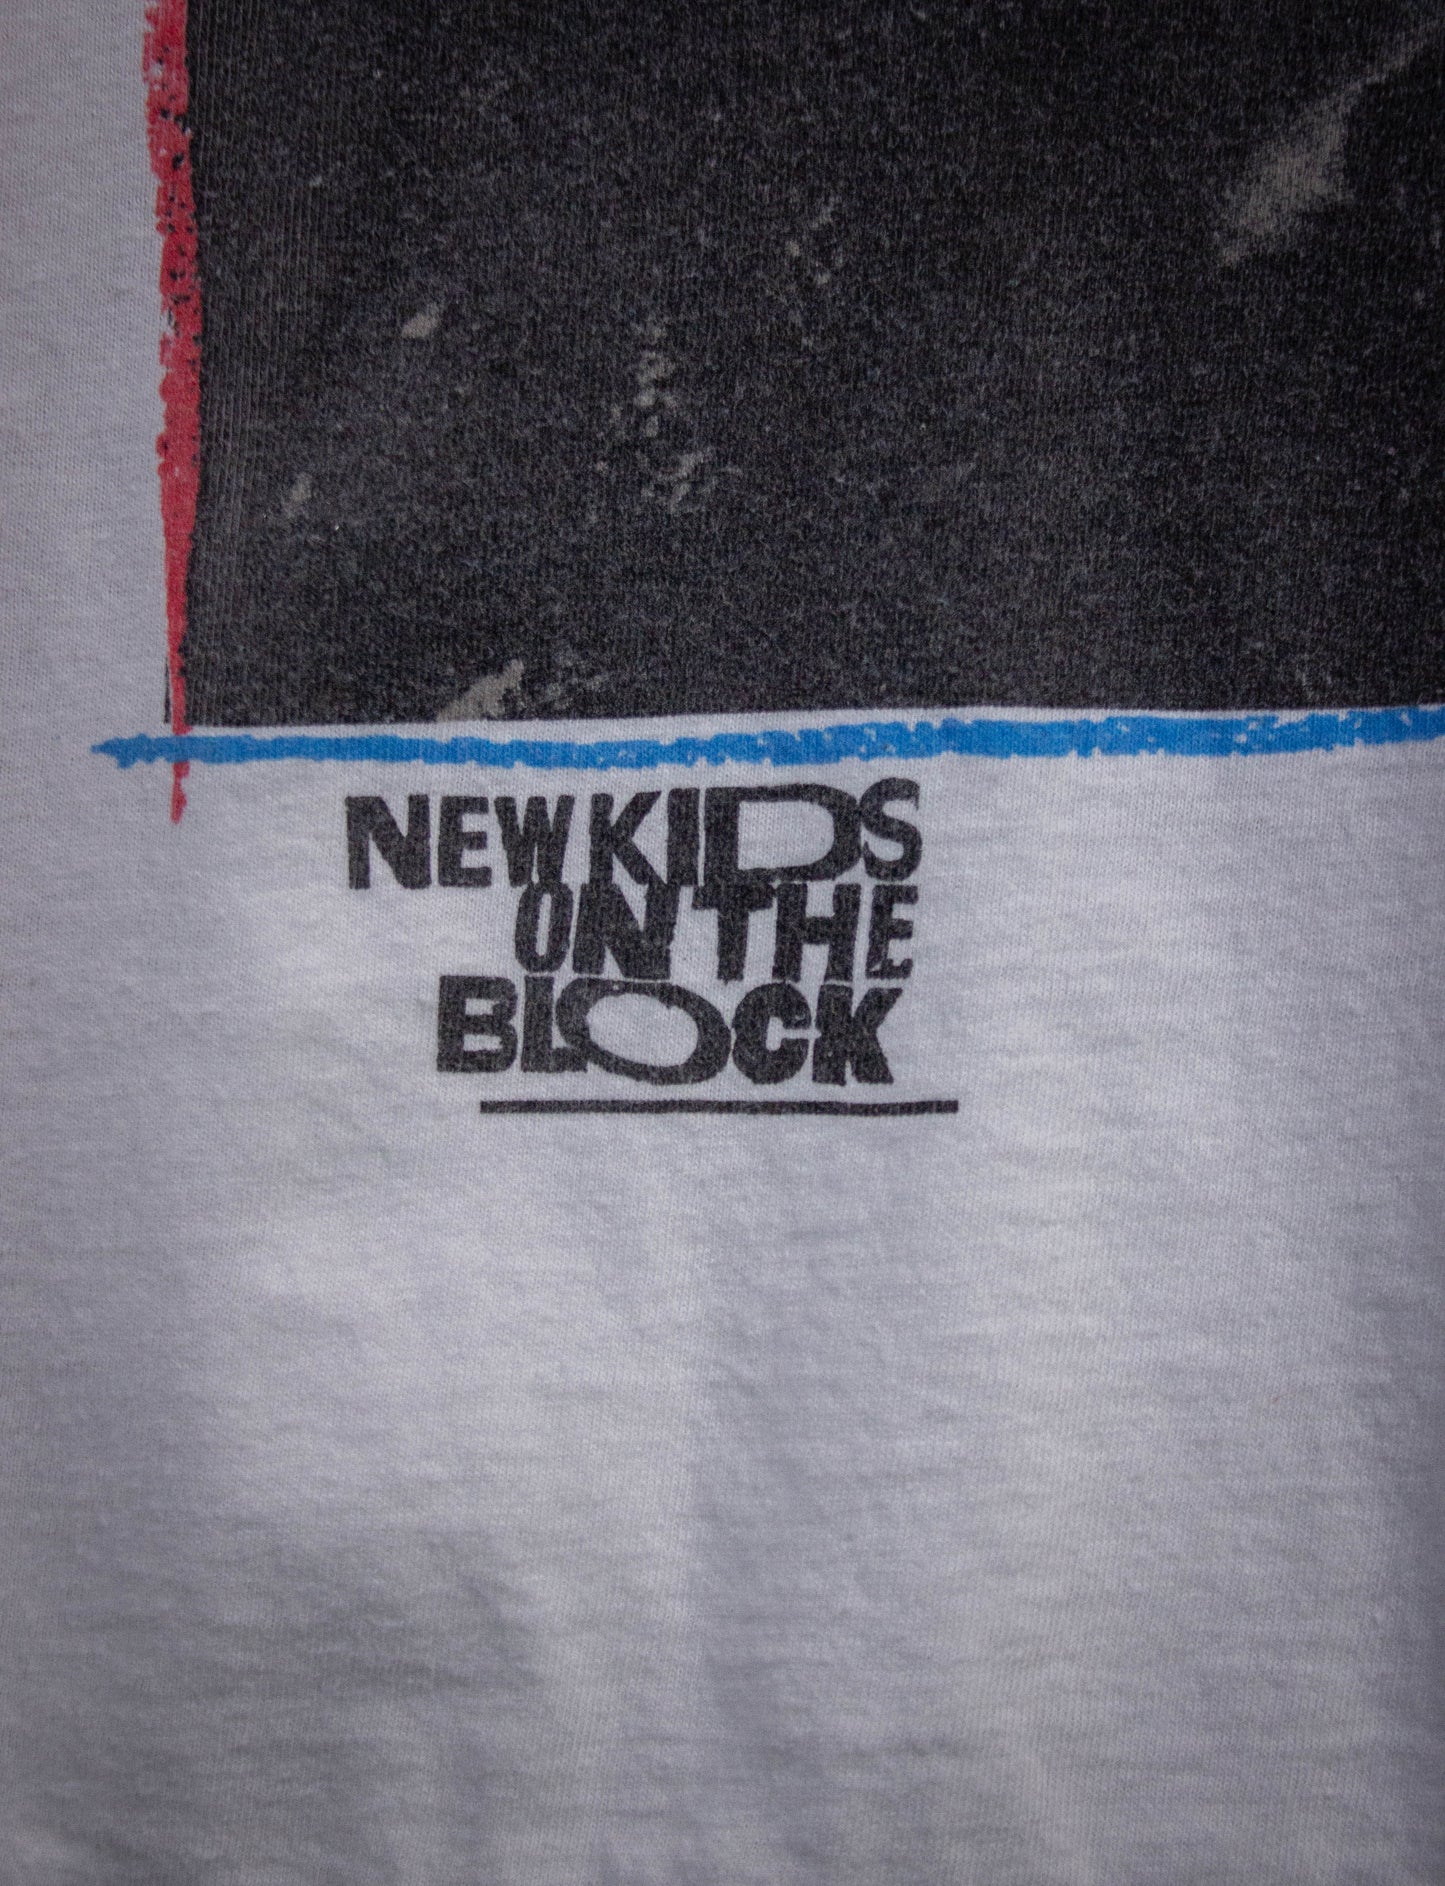 Vintage New Kids On The Block Joey McIntyre Concert T Shirt 1999 White Large